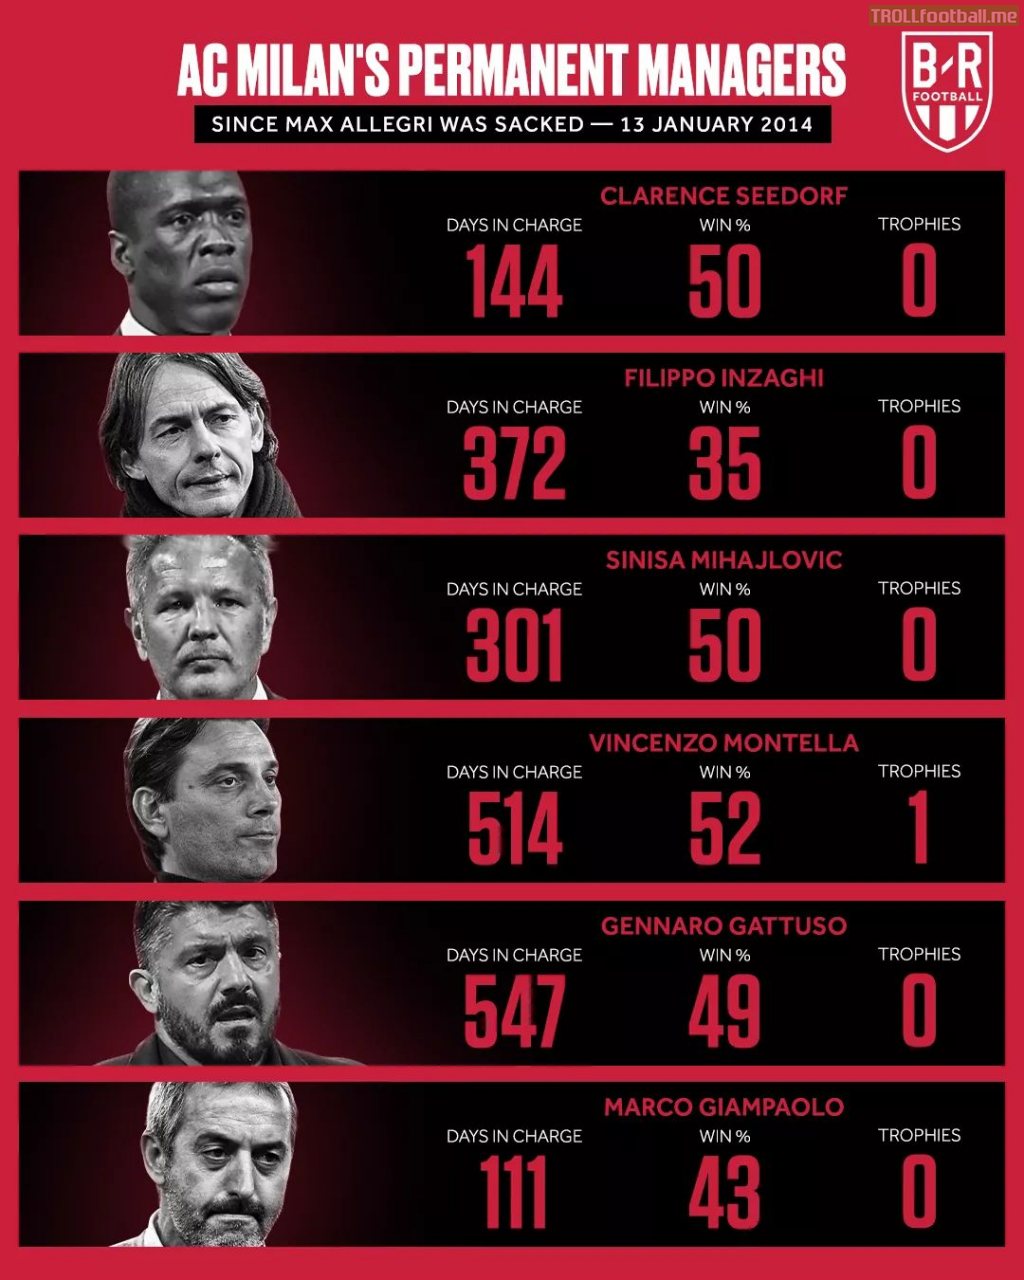 Milan coaches after sacking their last Serie A winner coach (10/11)